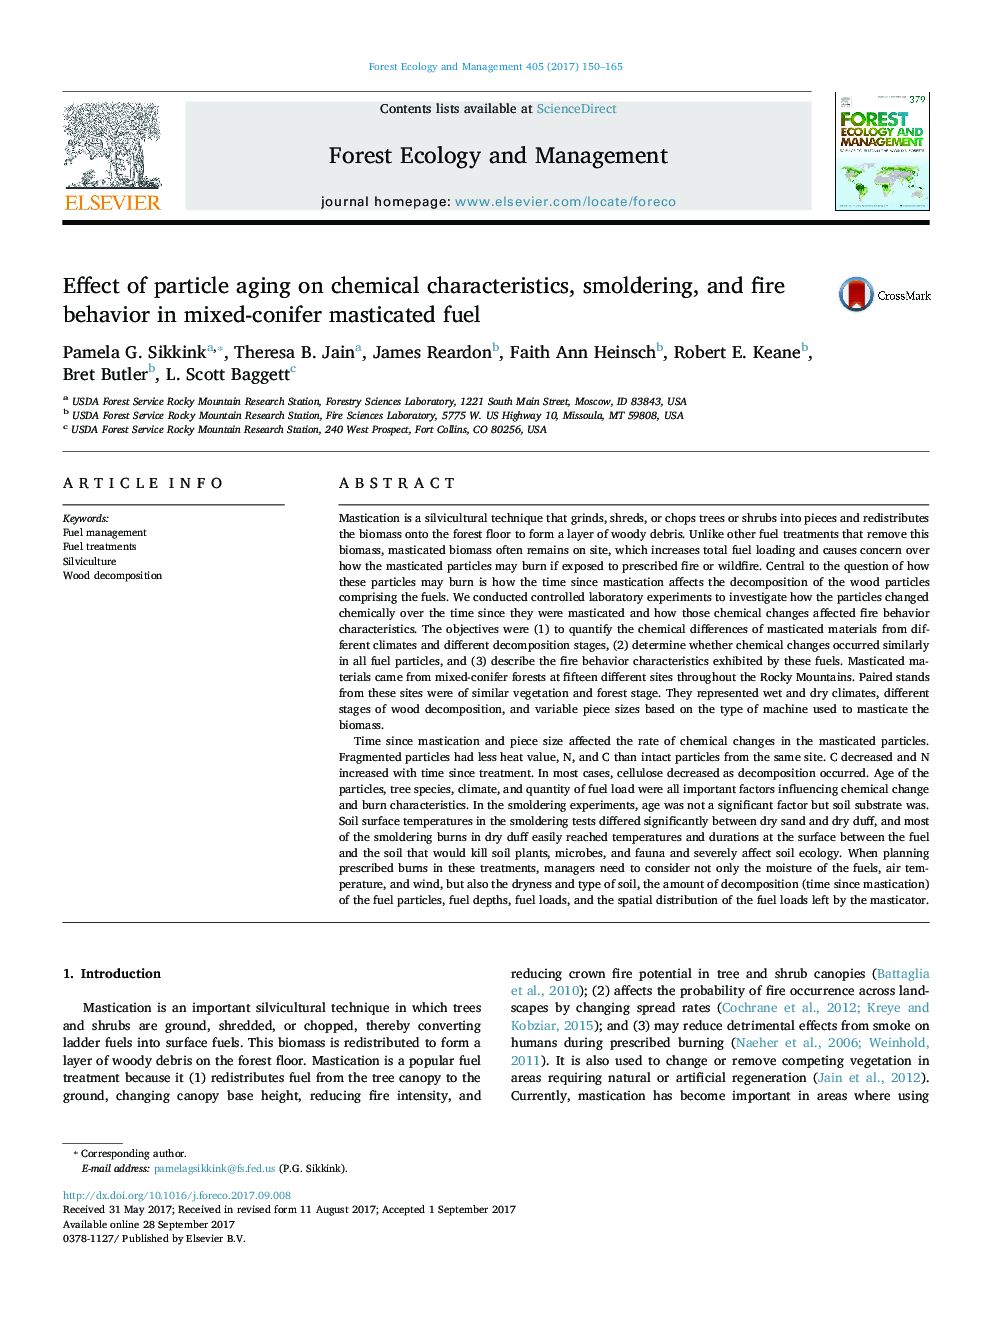 Effect of particle aging on chemical characteristics, smoldering, and fire behavior in mixed-conifer masticated fuel